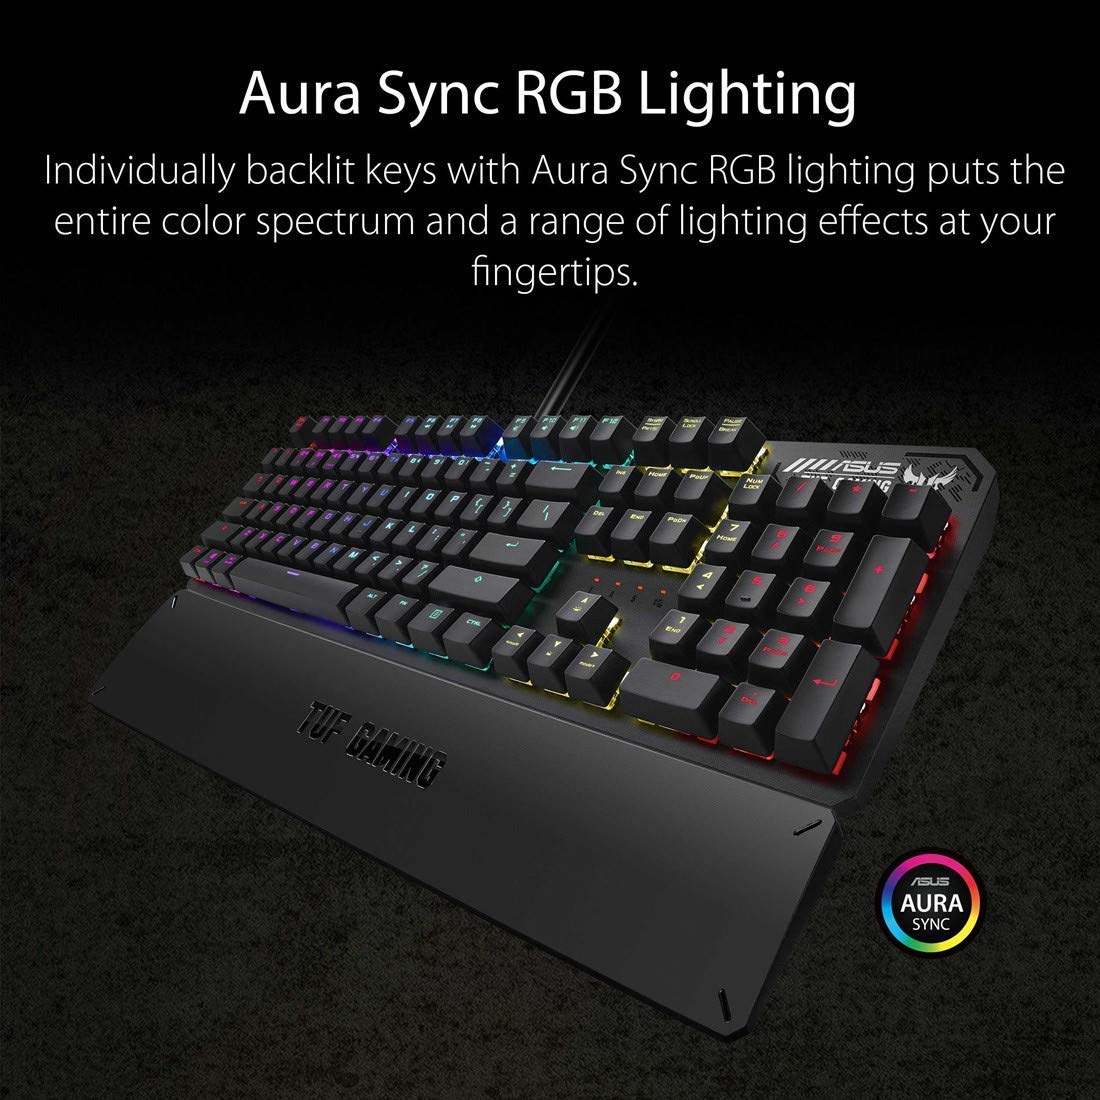 ASUS Mechanical PC Gaming Keyboard for PC - TUF K3 | Programmable Onboard Memory | Dedicated Media Controls, Aura Sync RGB Lighting | Detachable Magnetic Wrist Rest | Highly Durable | Black (Renewed)